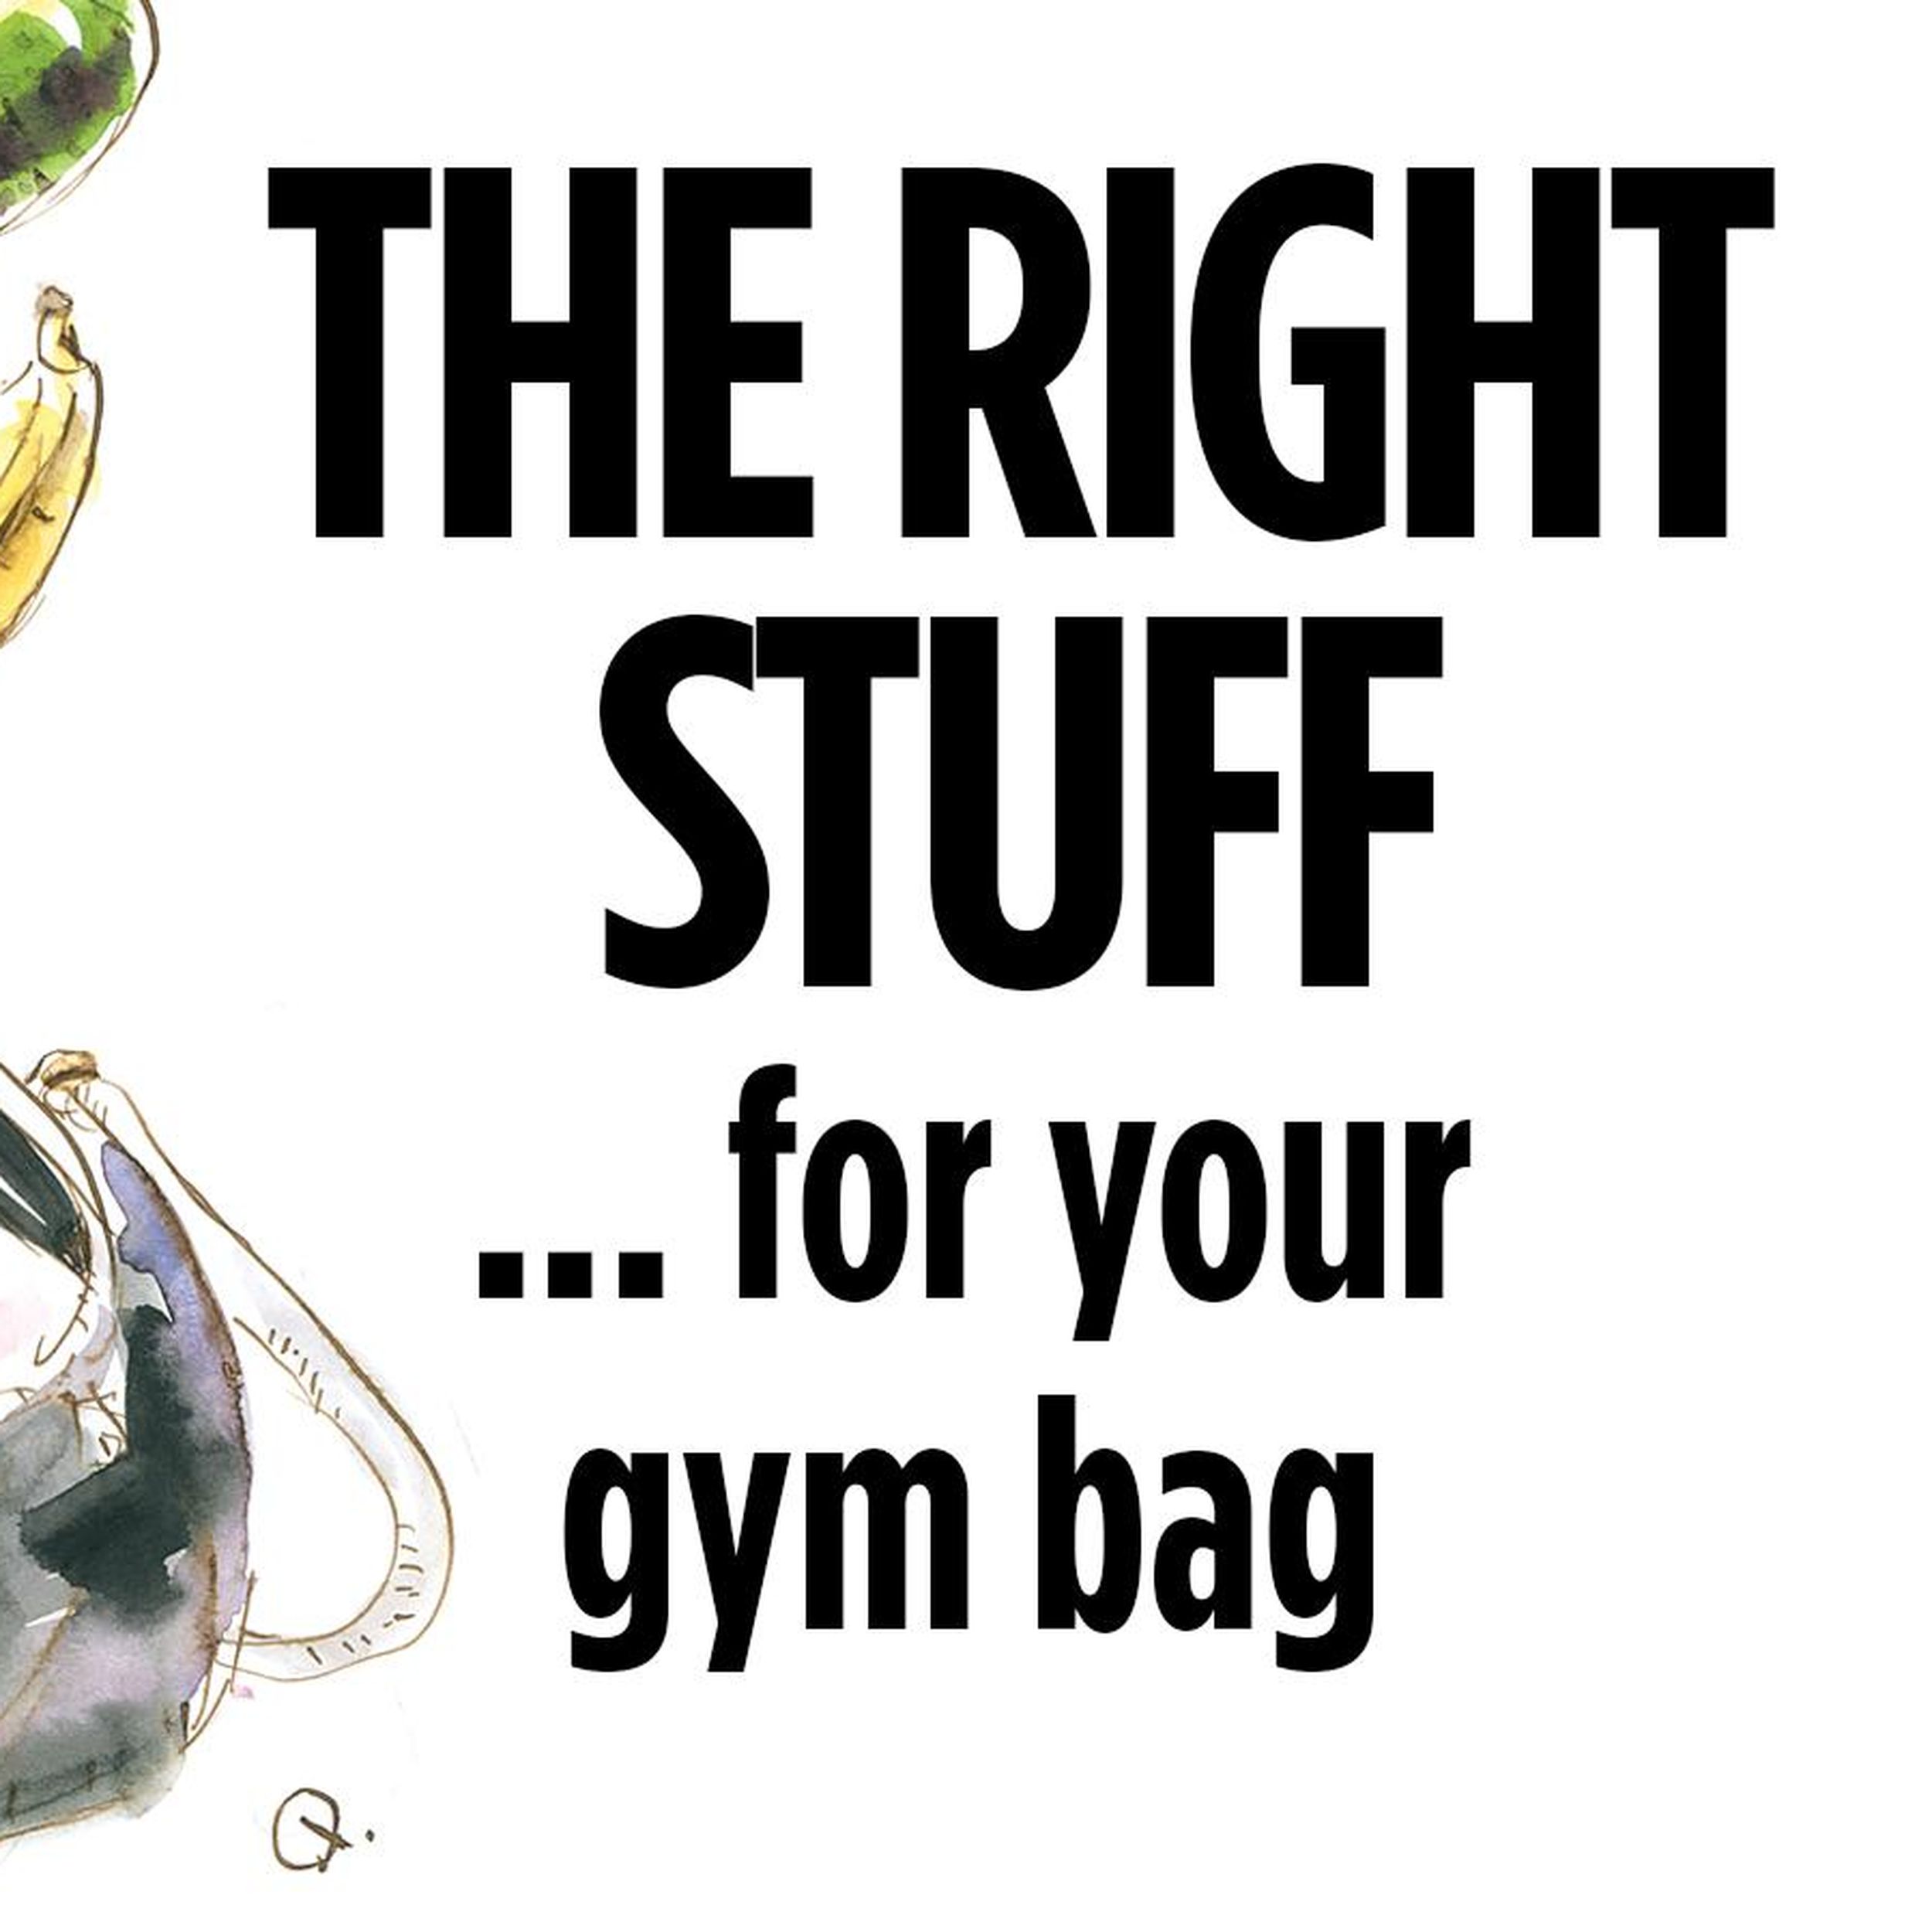 Break in a Bag: Gym Essentials for a Midday Workout